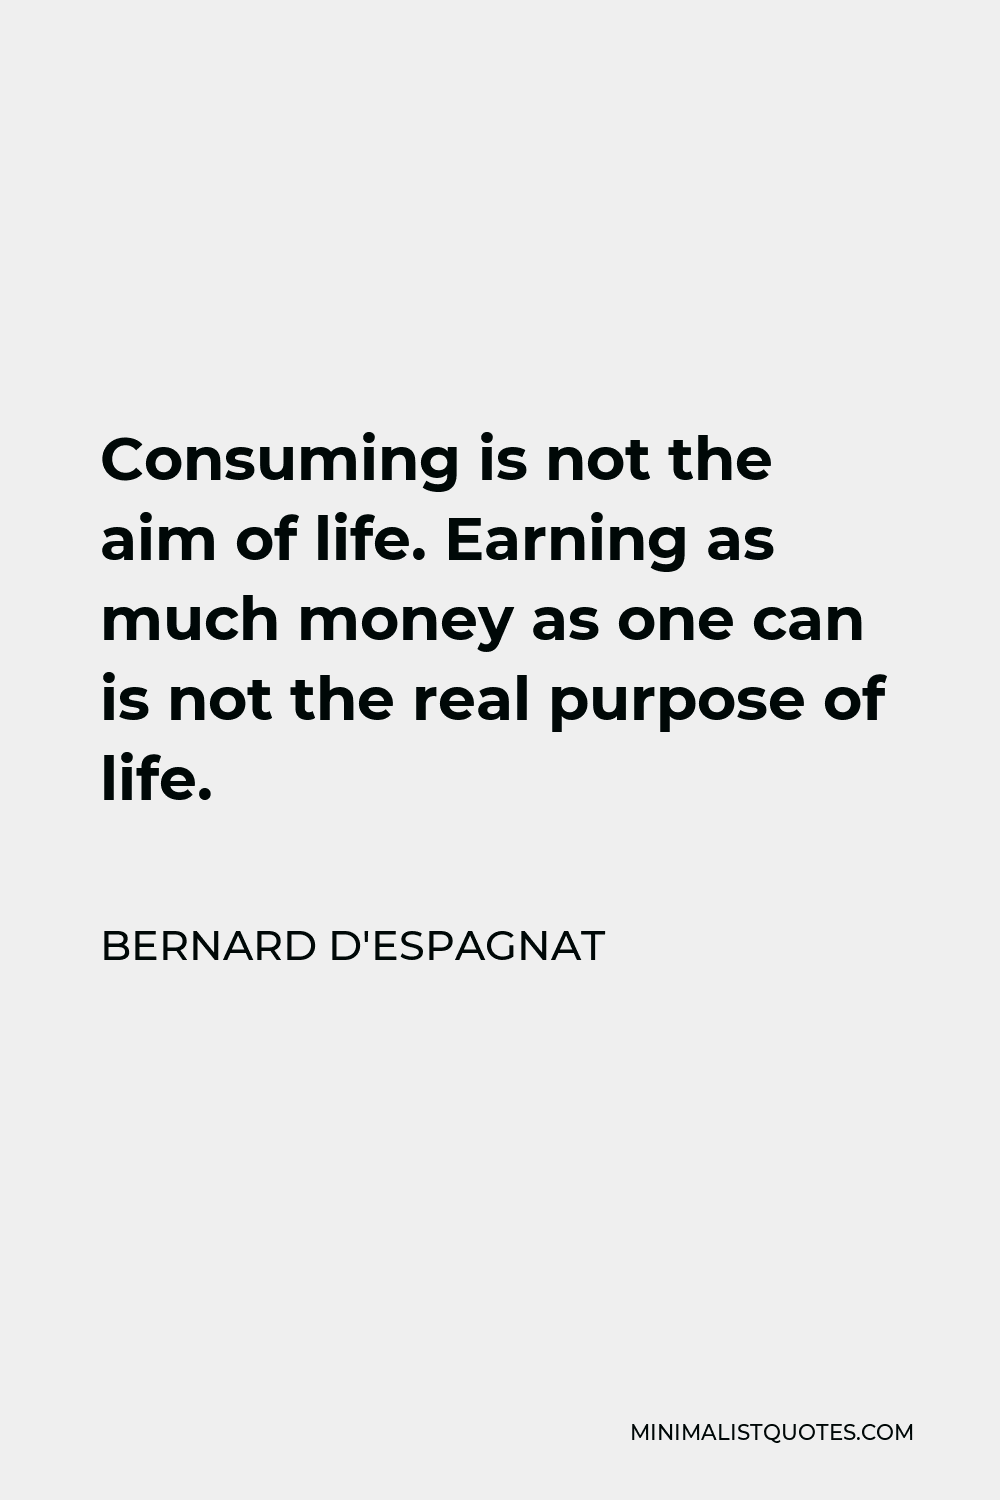 Bernard d'Espagnat Quote - Consuming is not the aim of life. Earning as much money as one can is not the real purpose of life.